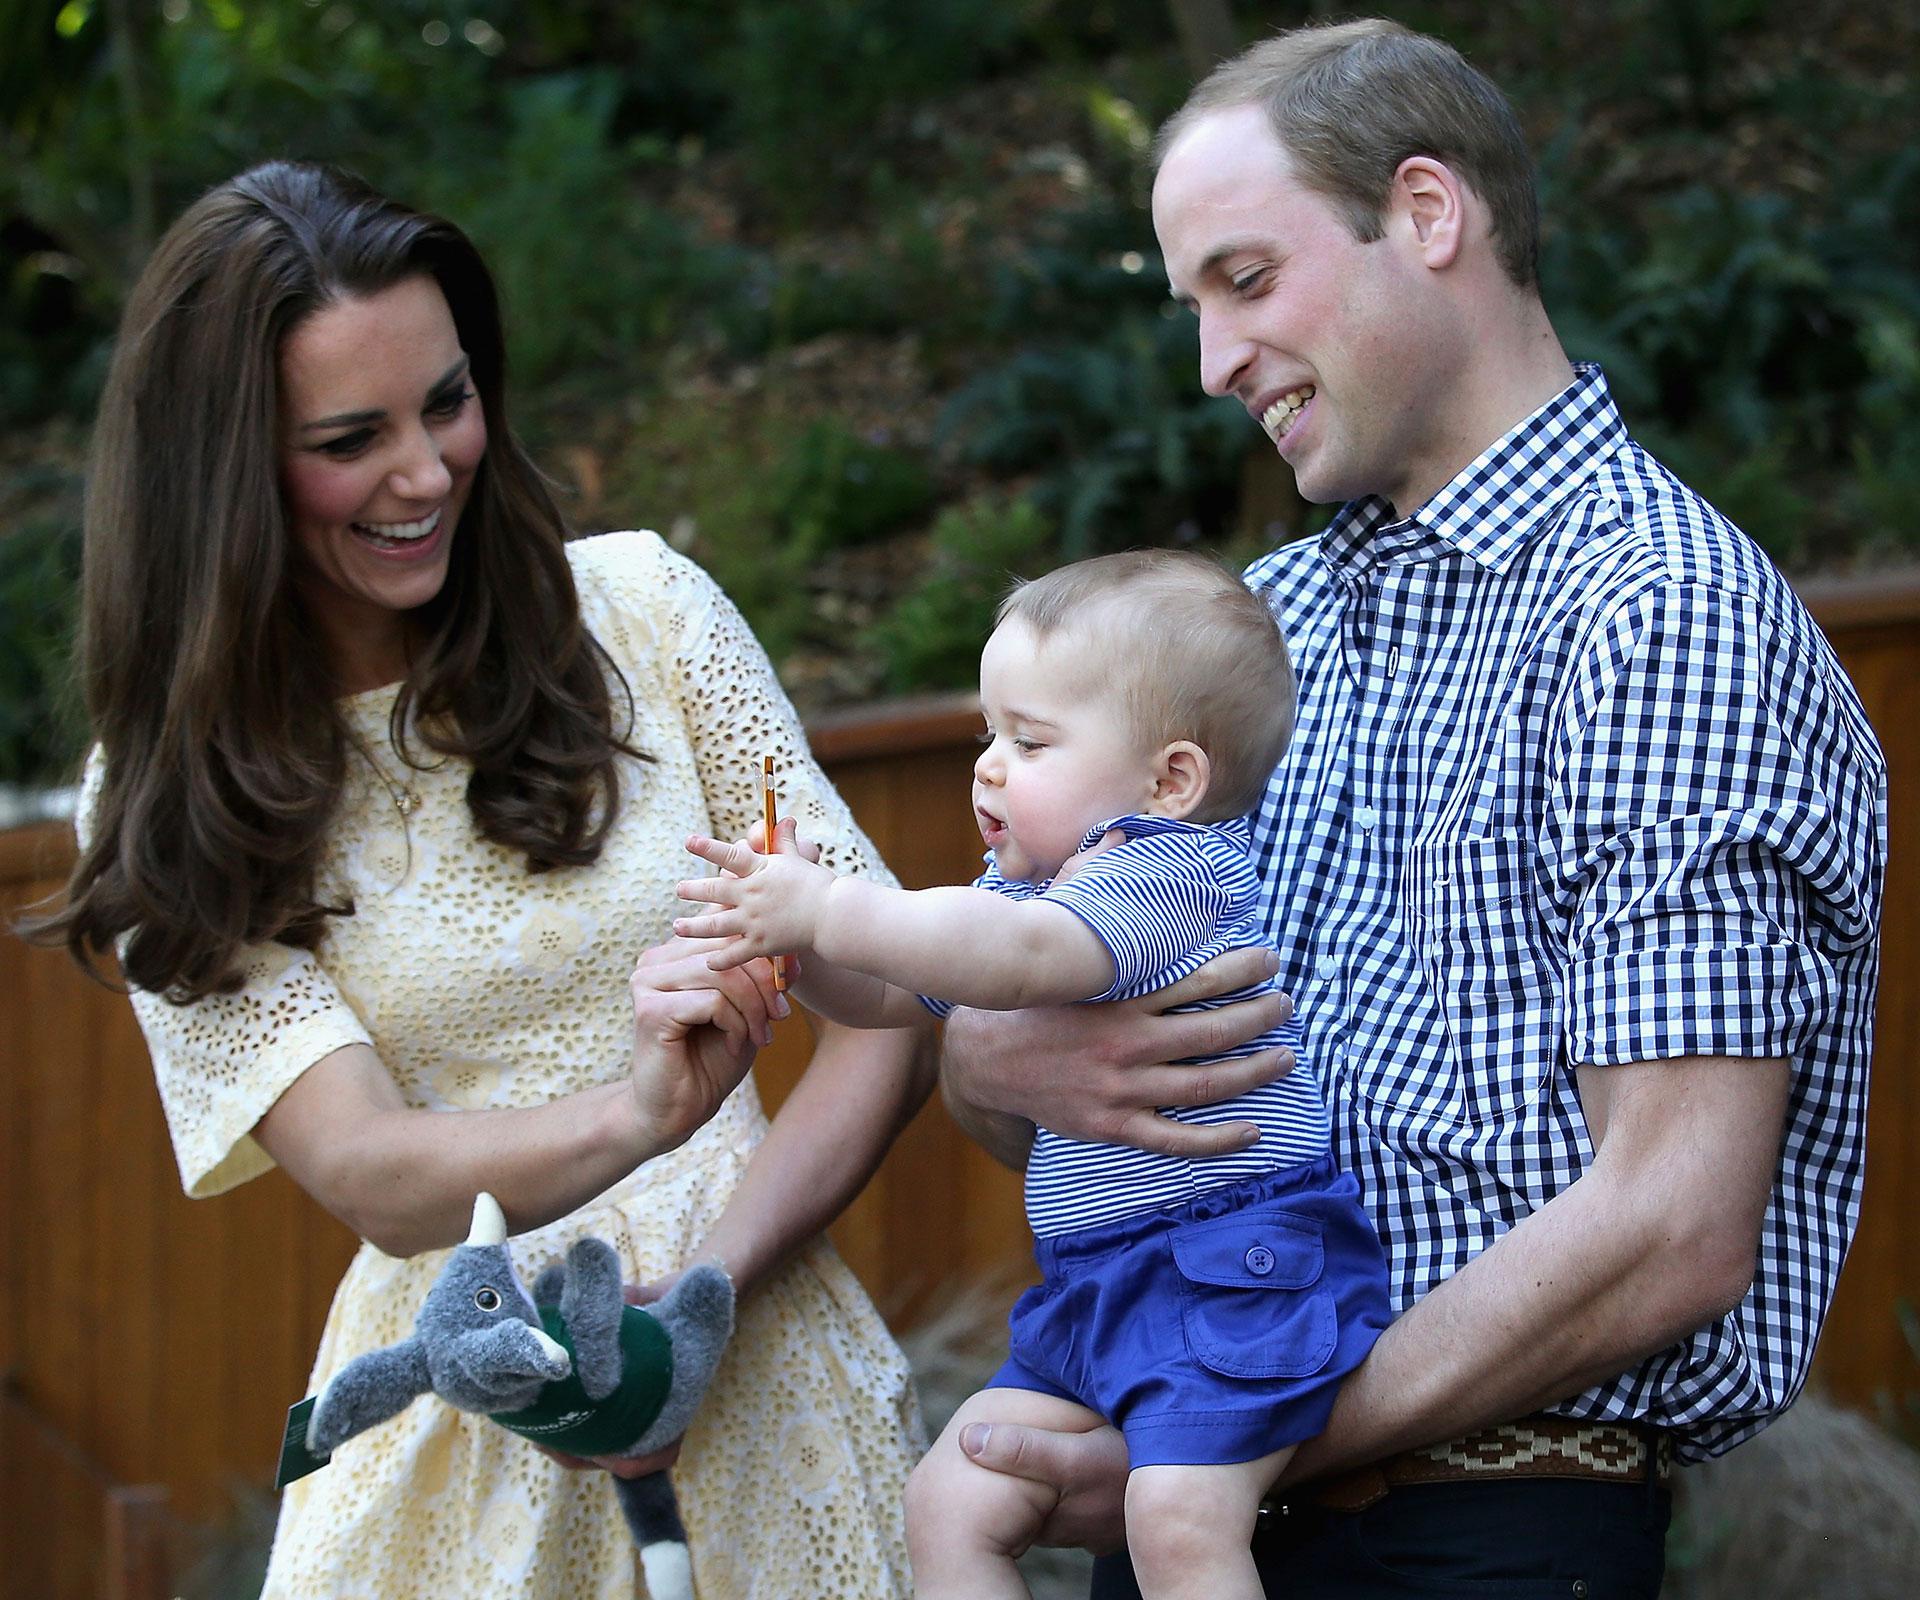 The Duke and Duchess of Cambridge with Prince George